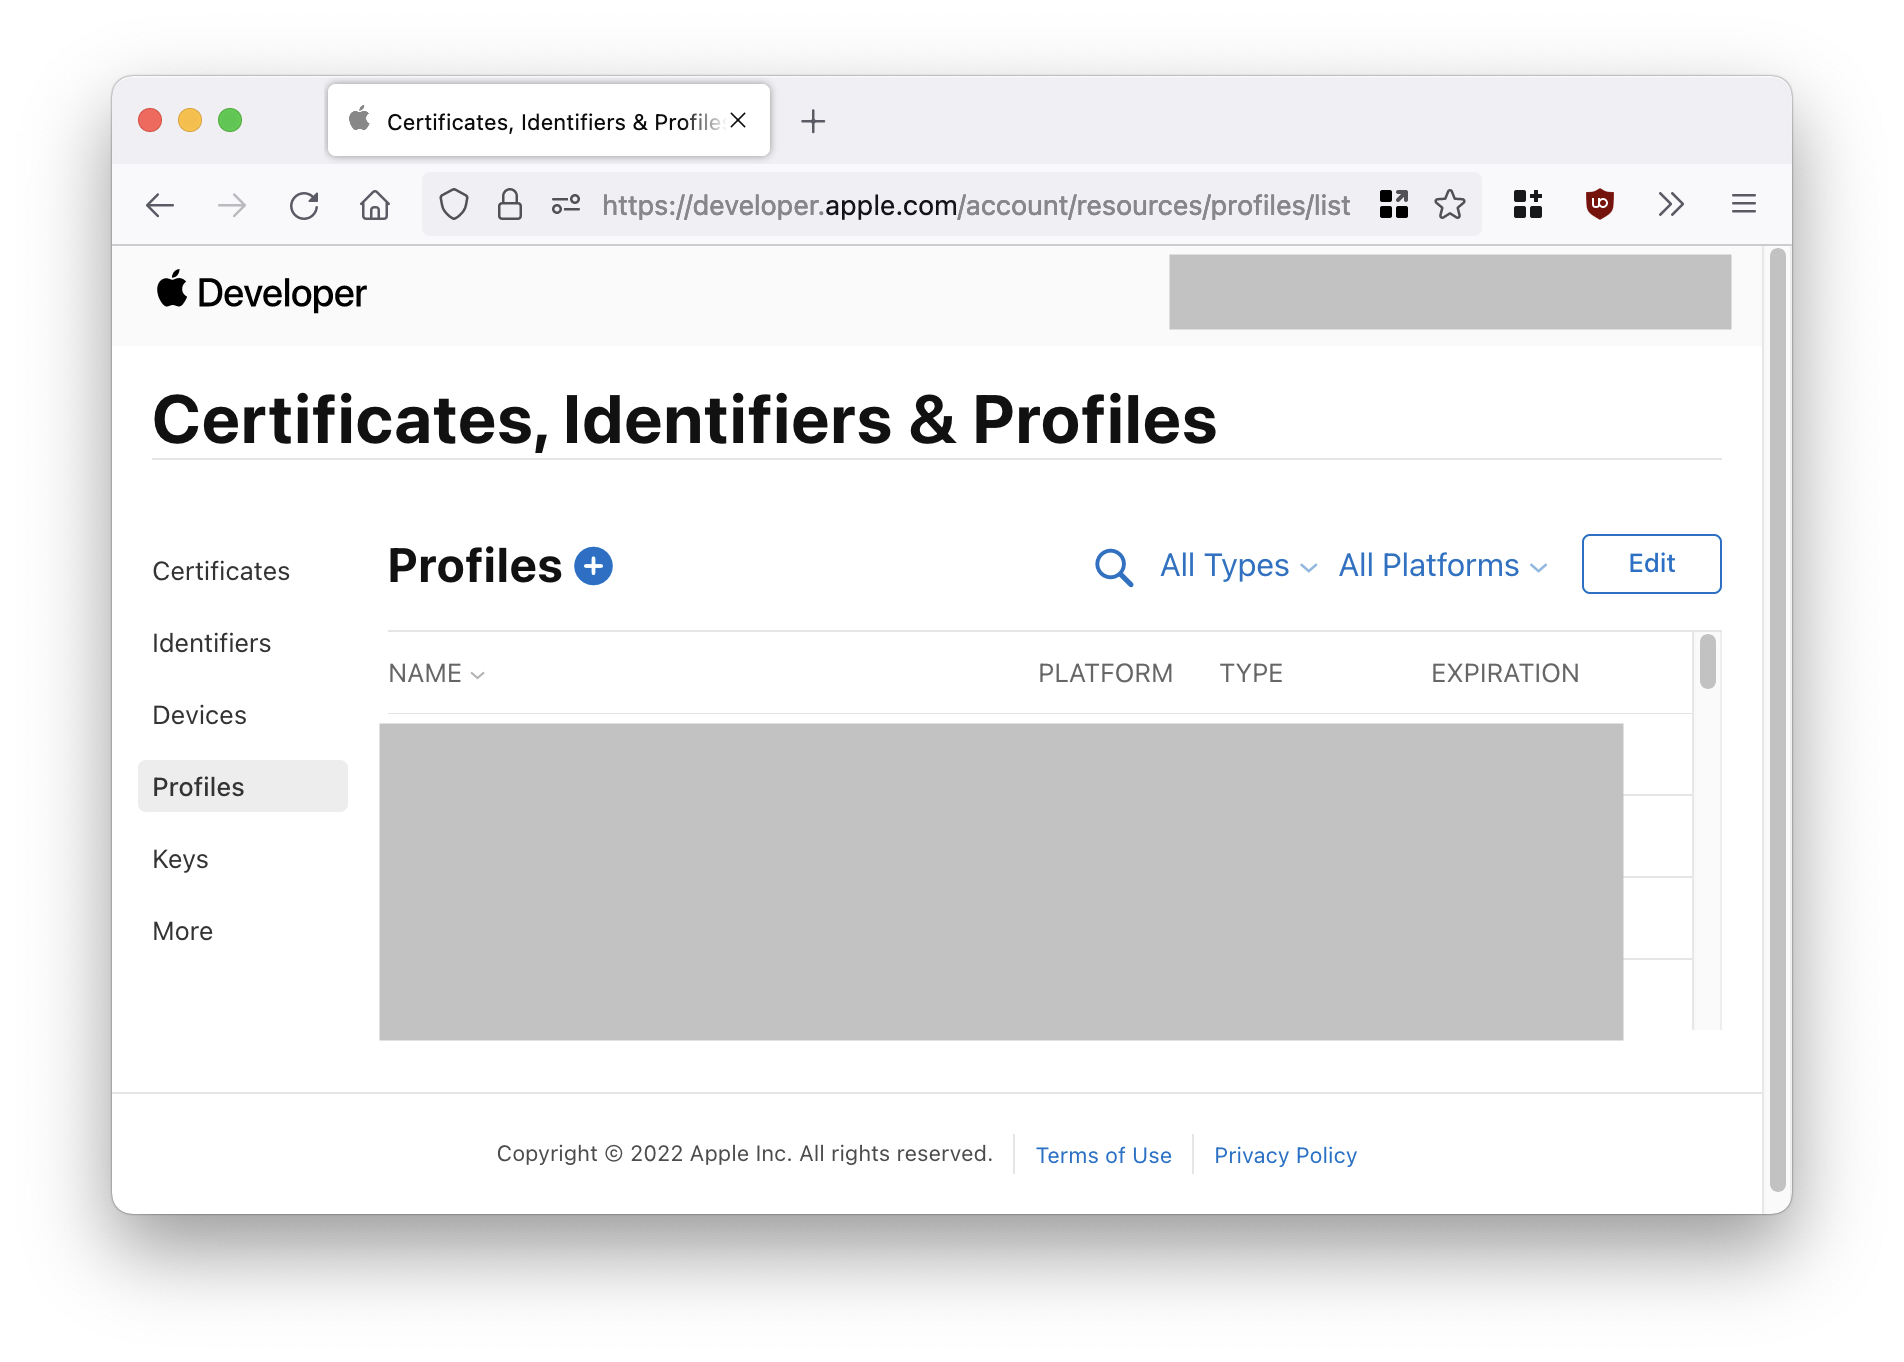 Screenshot the Apple Developer Page that allows editing Profiles